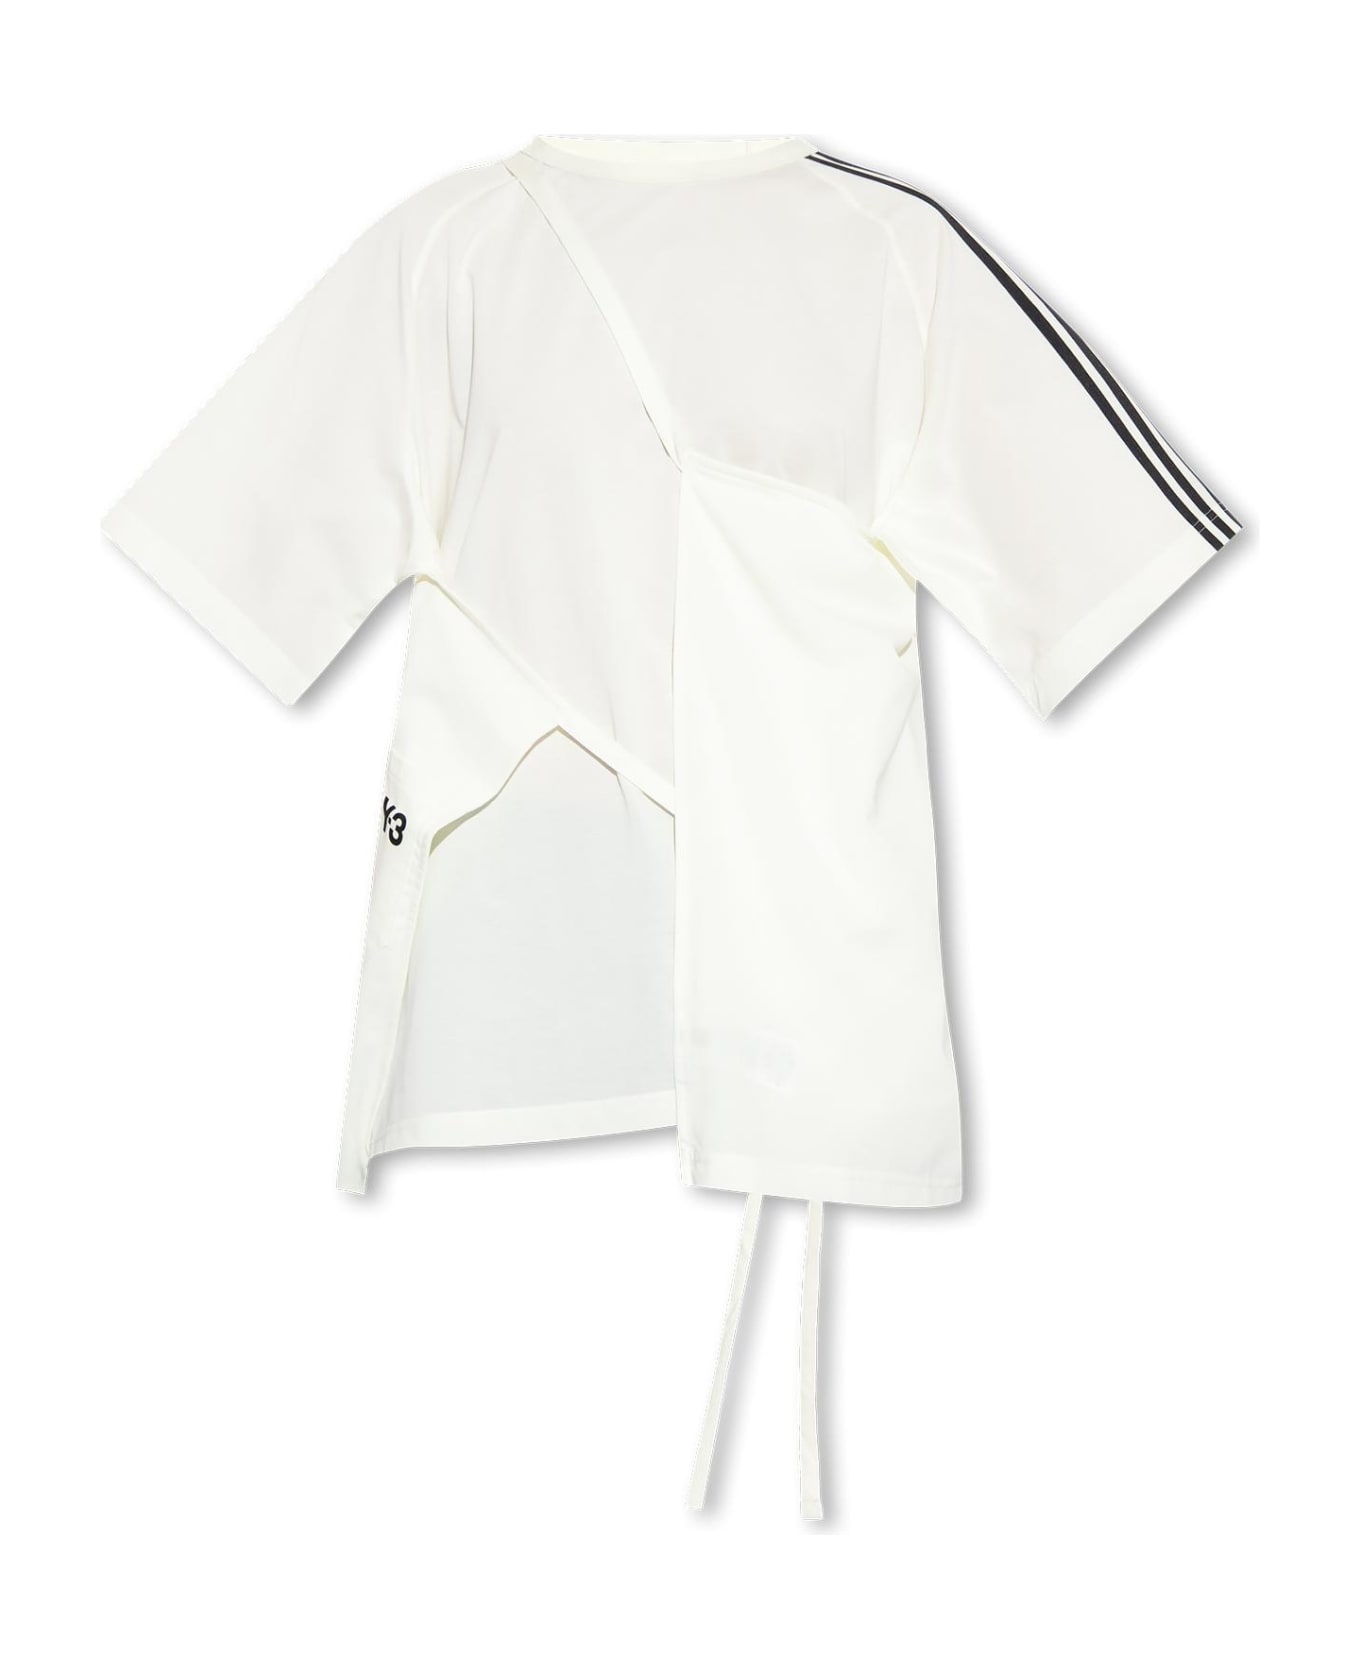 Y-3 T-shirt With Tie Detail - White Tシャツ